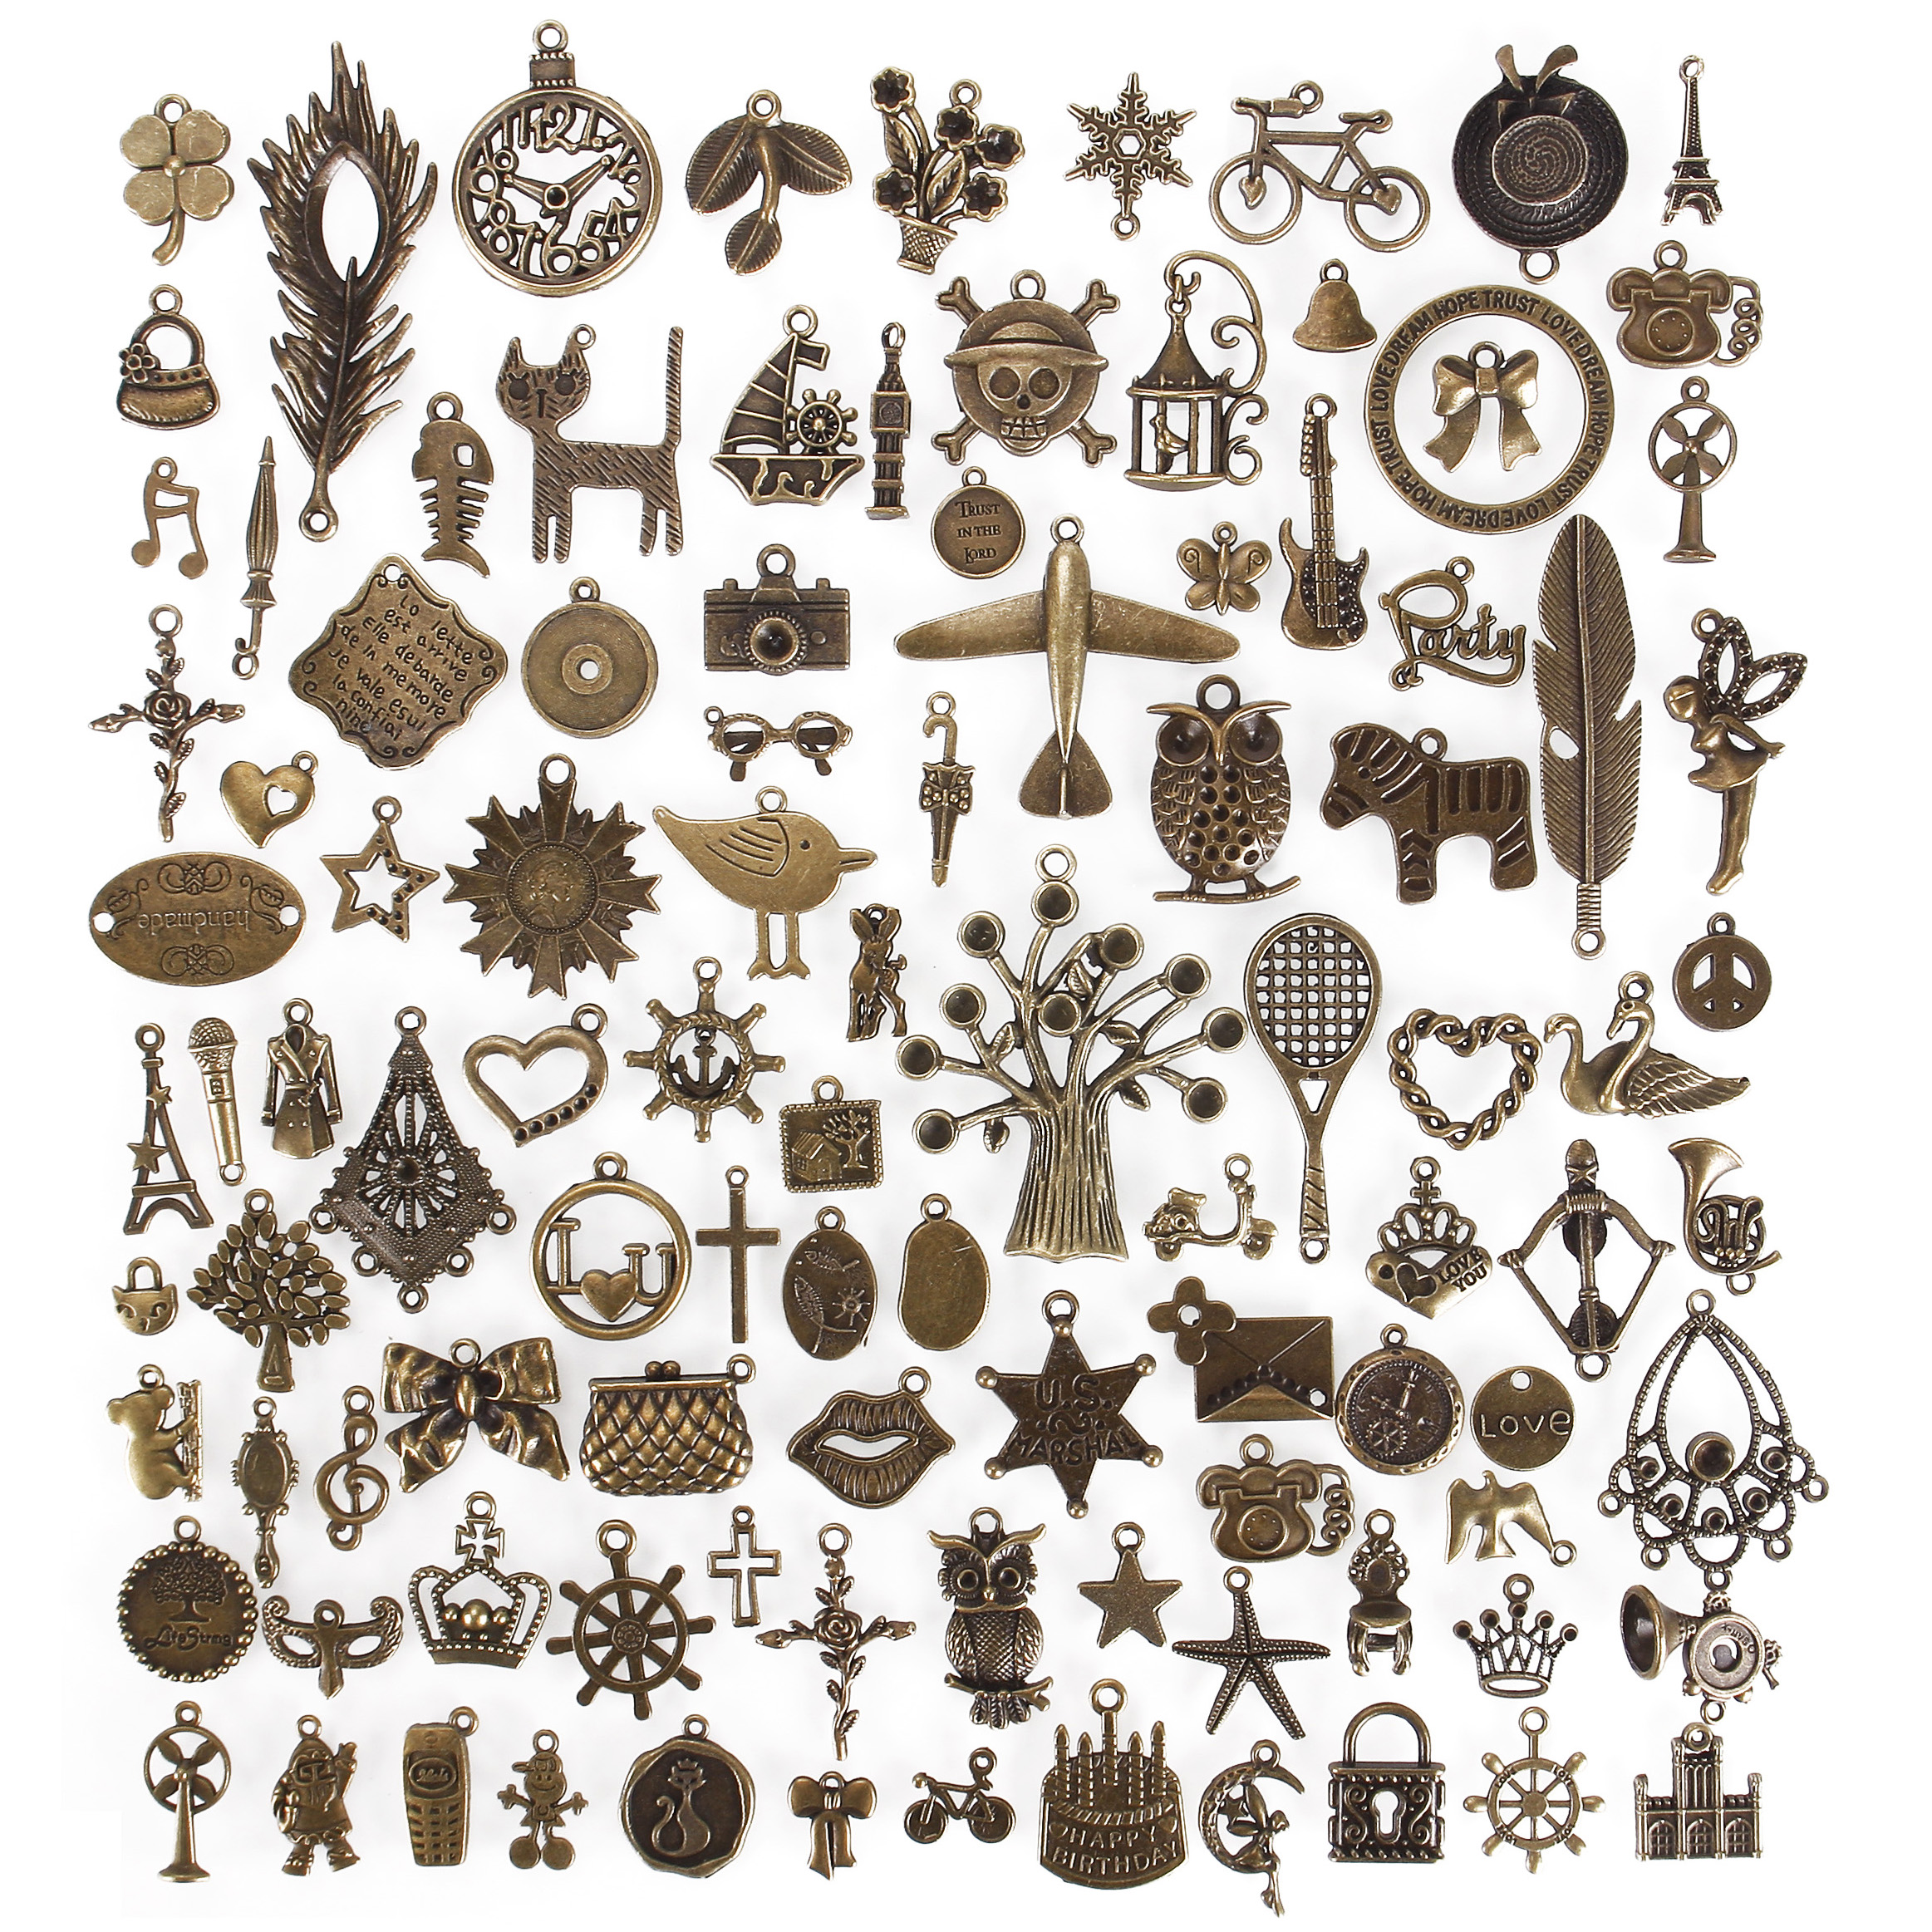 100Pcs Mixed Type Antique Bronze Charms Alloy Pendant DIY Accessories for Bracelet Necklace Jewelry Making and Craft